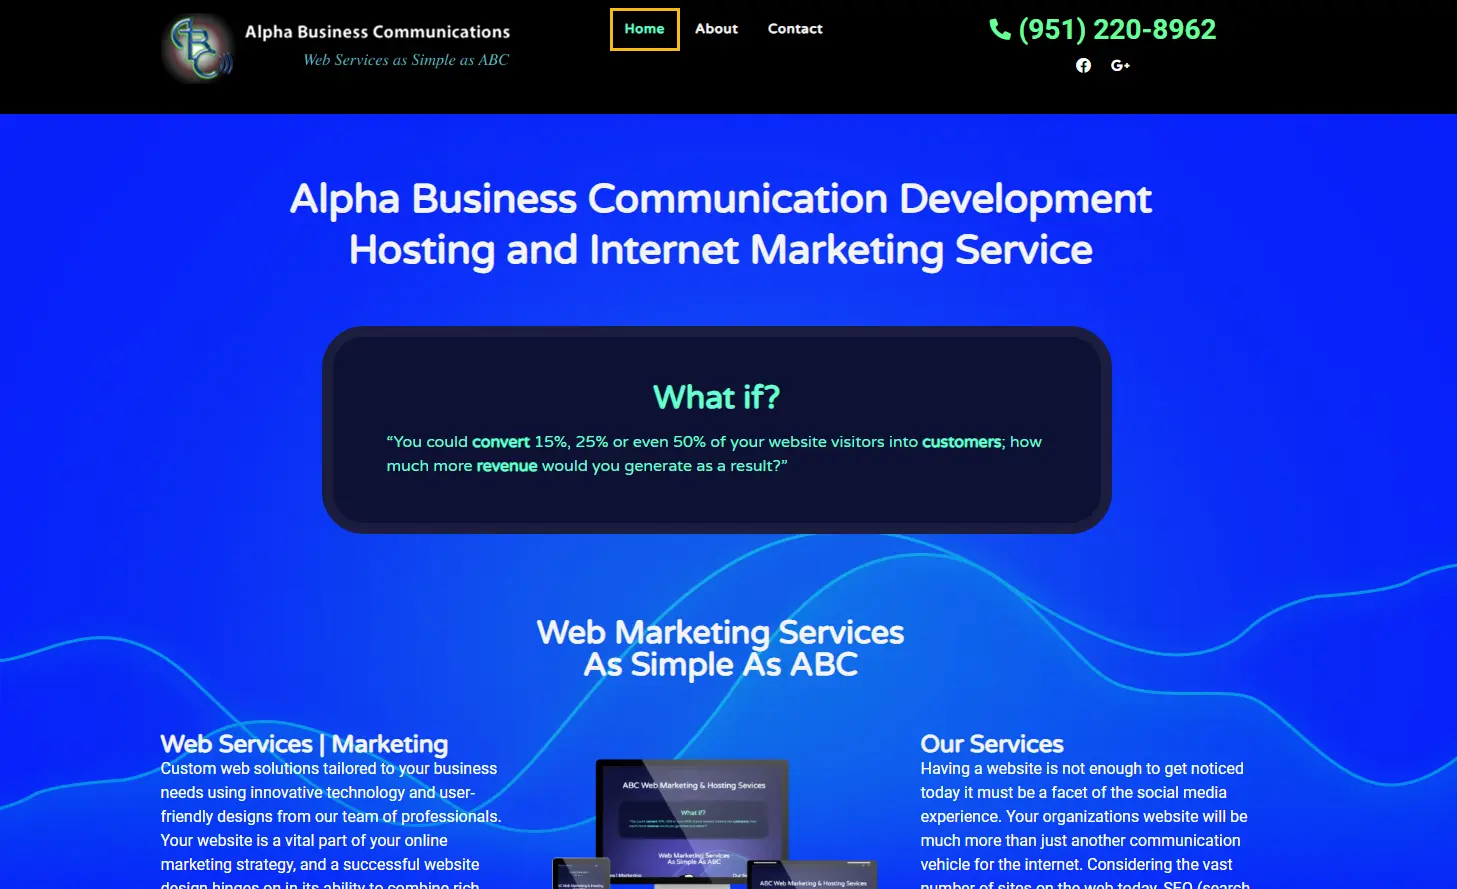 GraphicKandy Website Design and Marketing